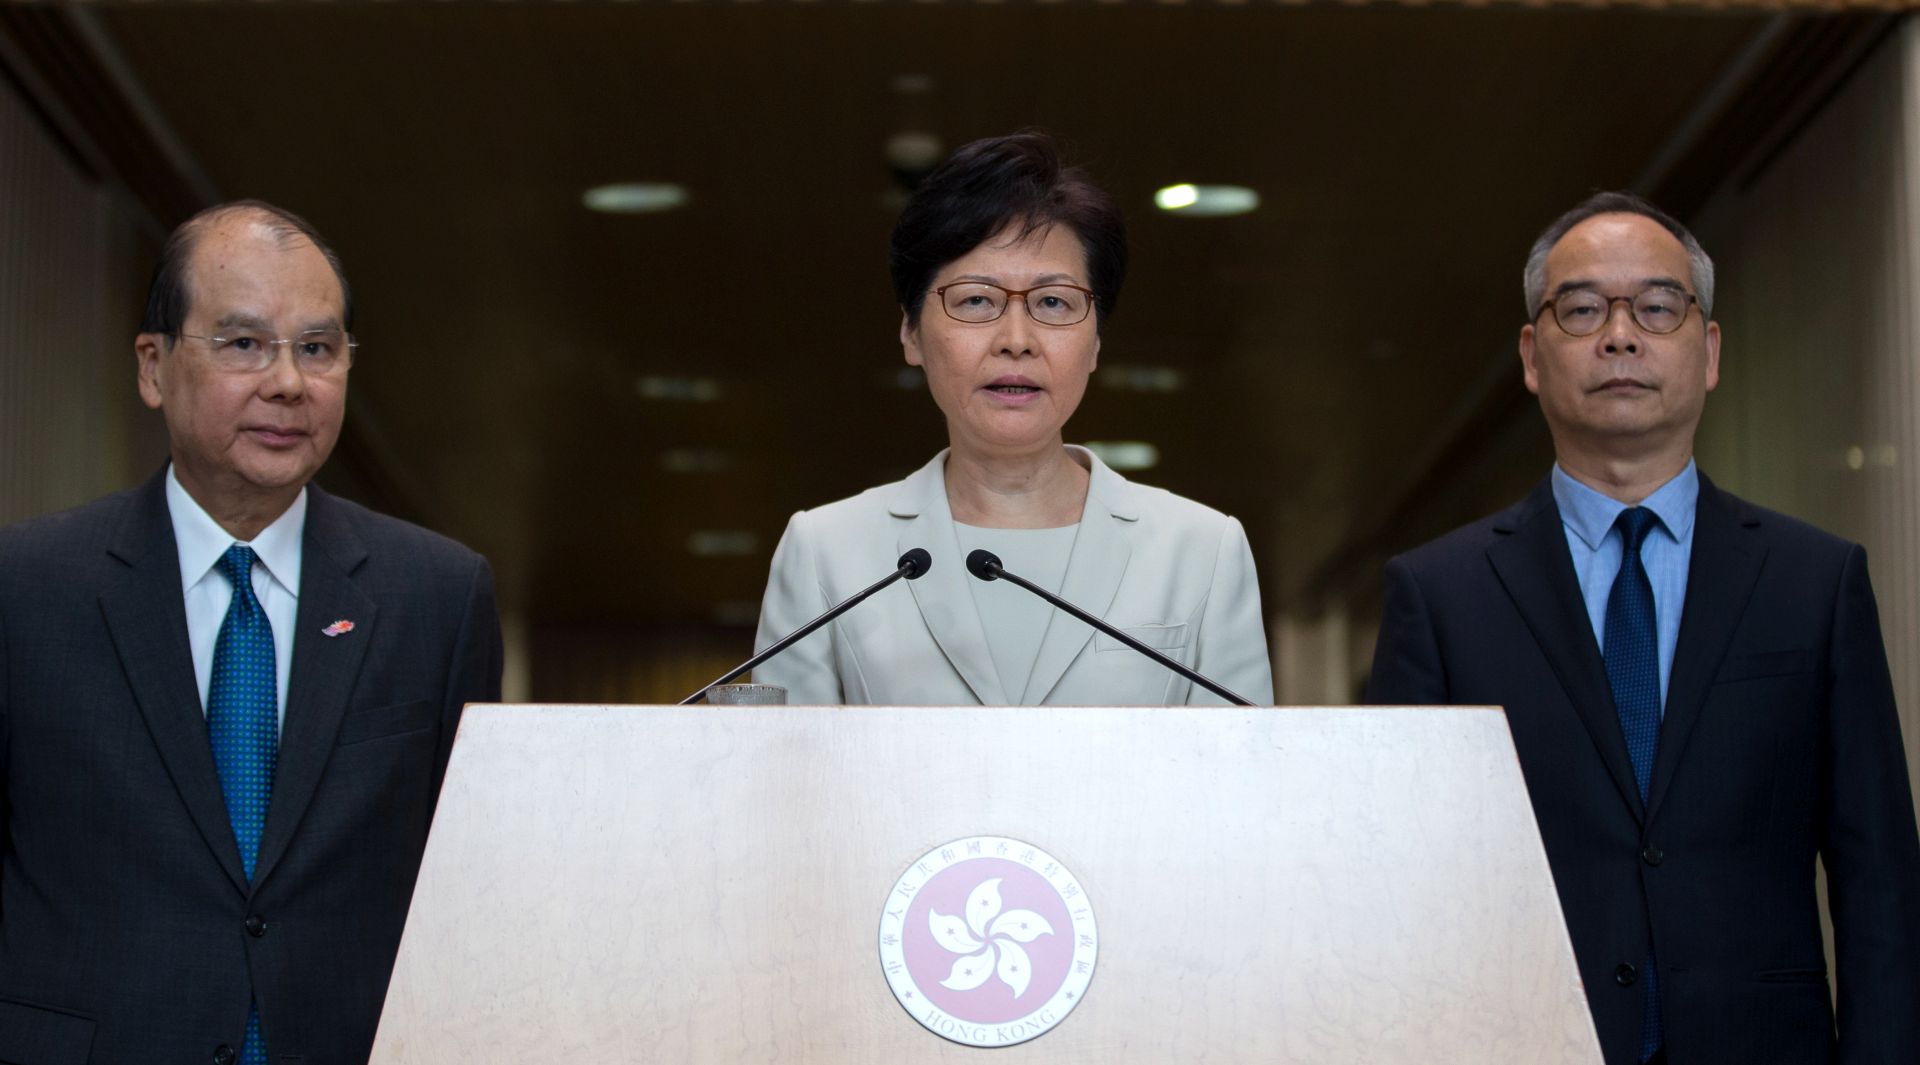 epa07818324 Hong Kong Chief Executive Carrie Lam (C) attends a press conference flanked by Matthew Cheung Kin-chung (L), Chief Secretary for Administration and Lau Kong-wah (R), Secretary for Home Affairs of Hong Kong Government, at the central government offices in Hong Kong, China, 05 September 2019. Lam announced the withdrawal of a controversial extradition bill, which sparked months of large protests and unrest in Hong Kong.  EPA/JEROME FAVRE